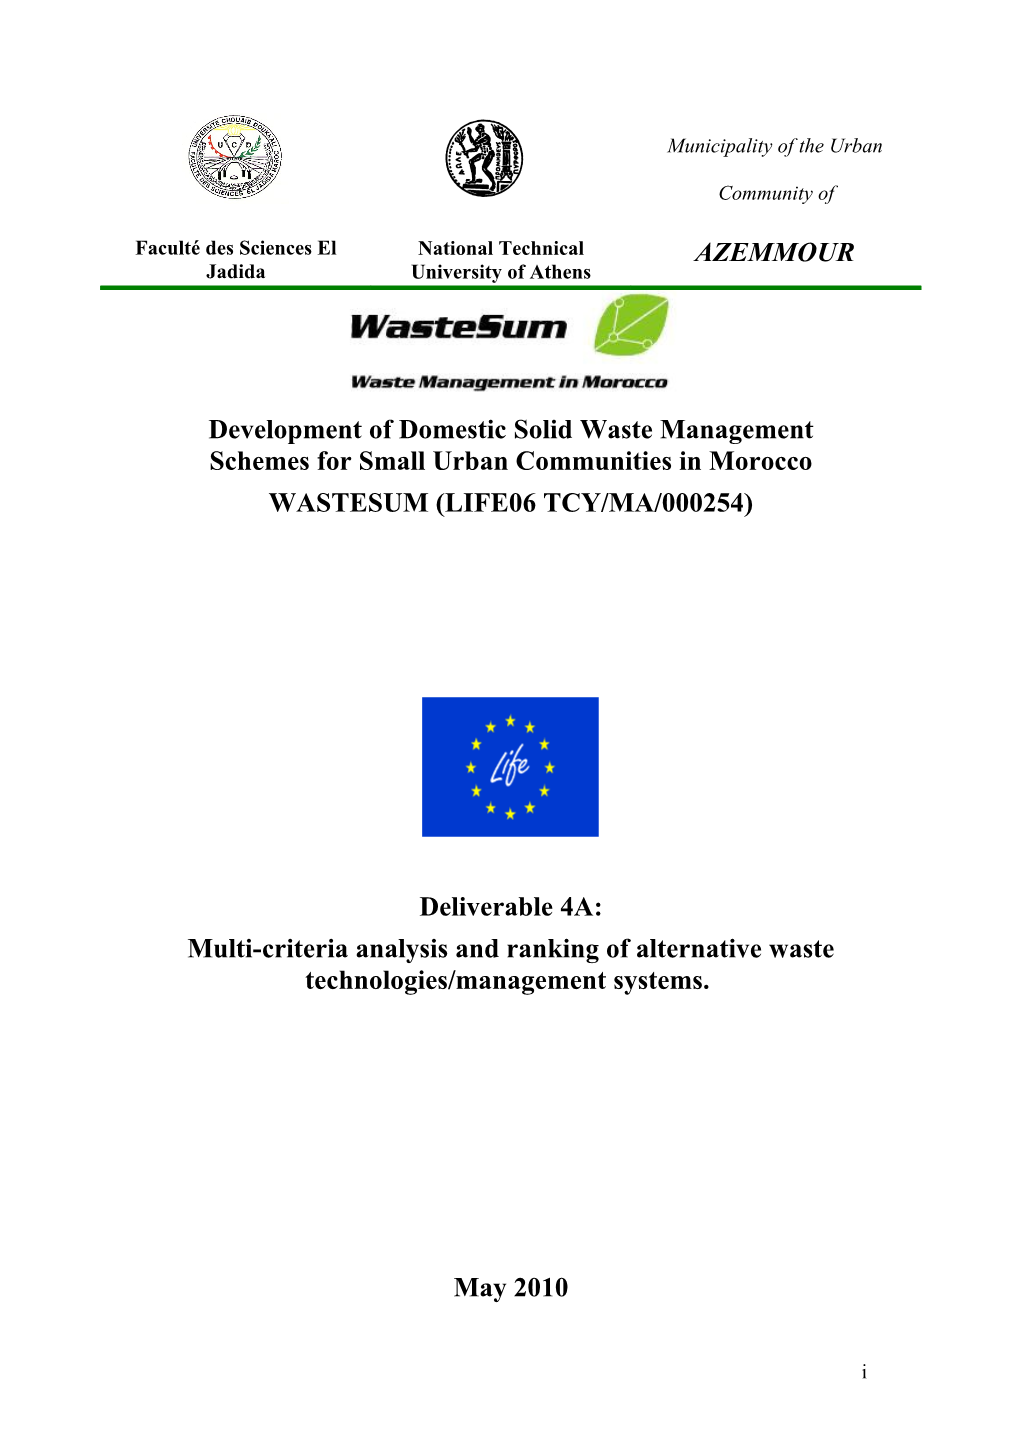 Development of Domestic Solid Waste Management Schemes for Small Urban Communities in Morocco